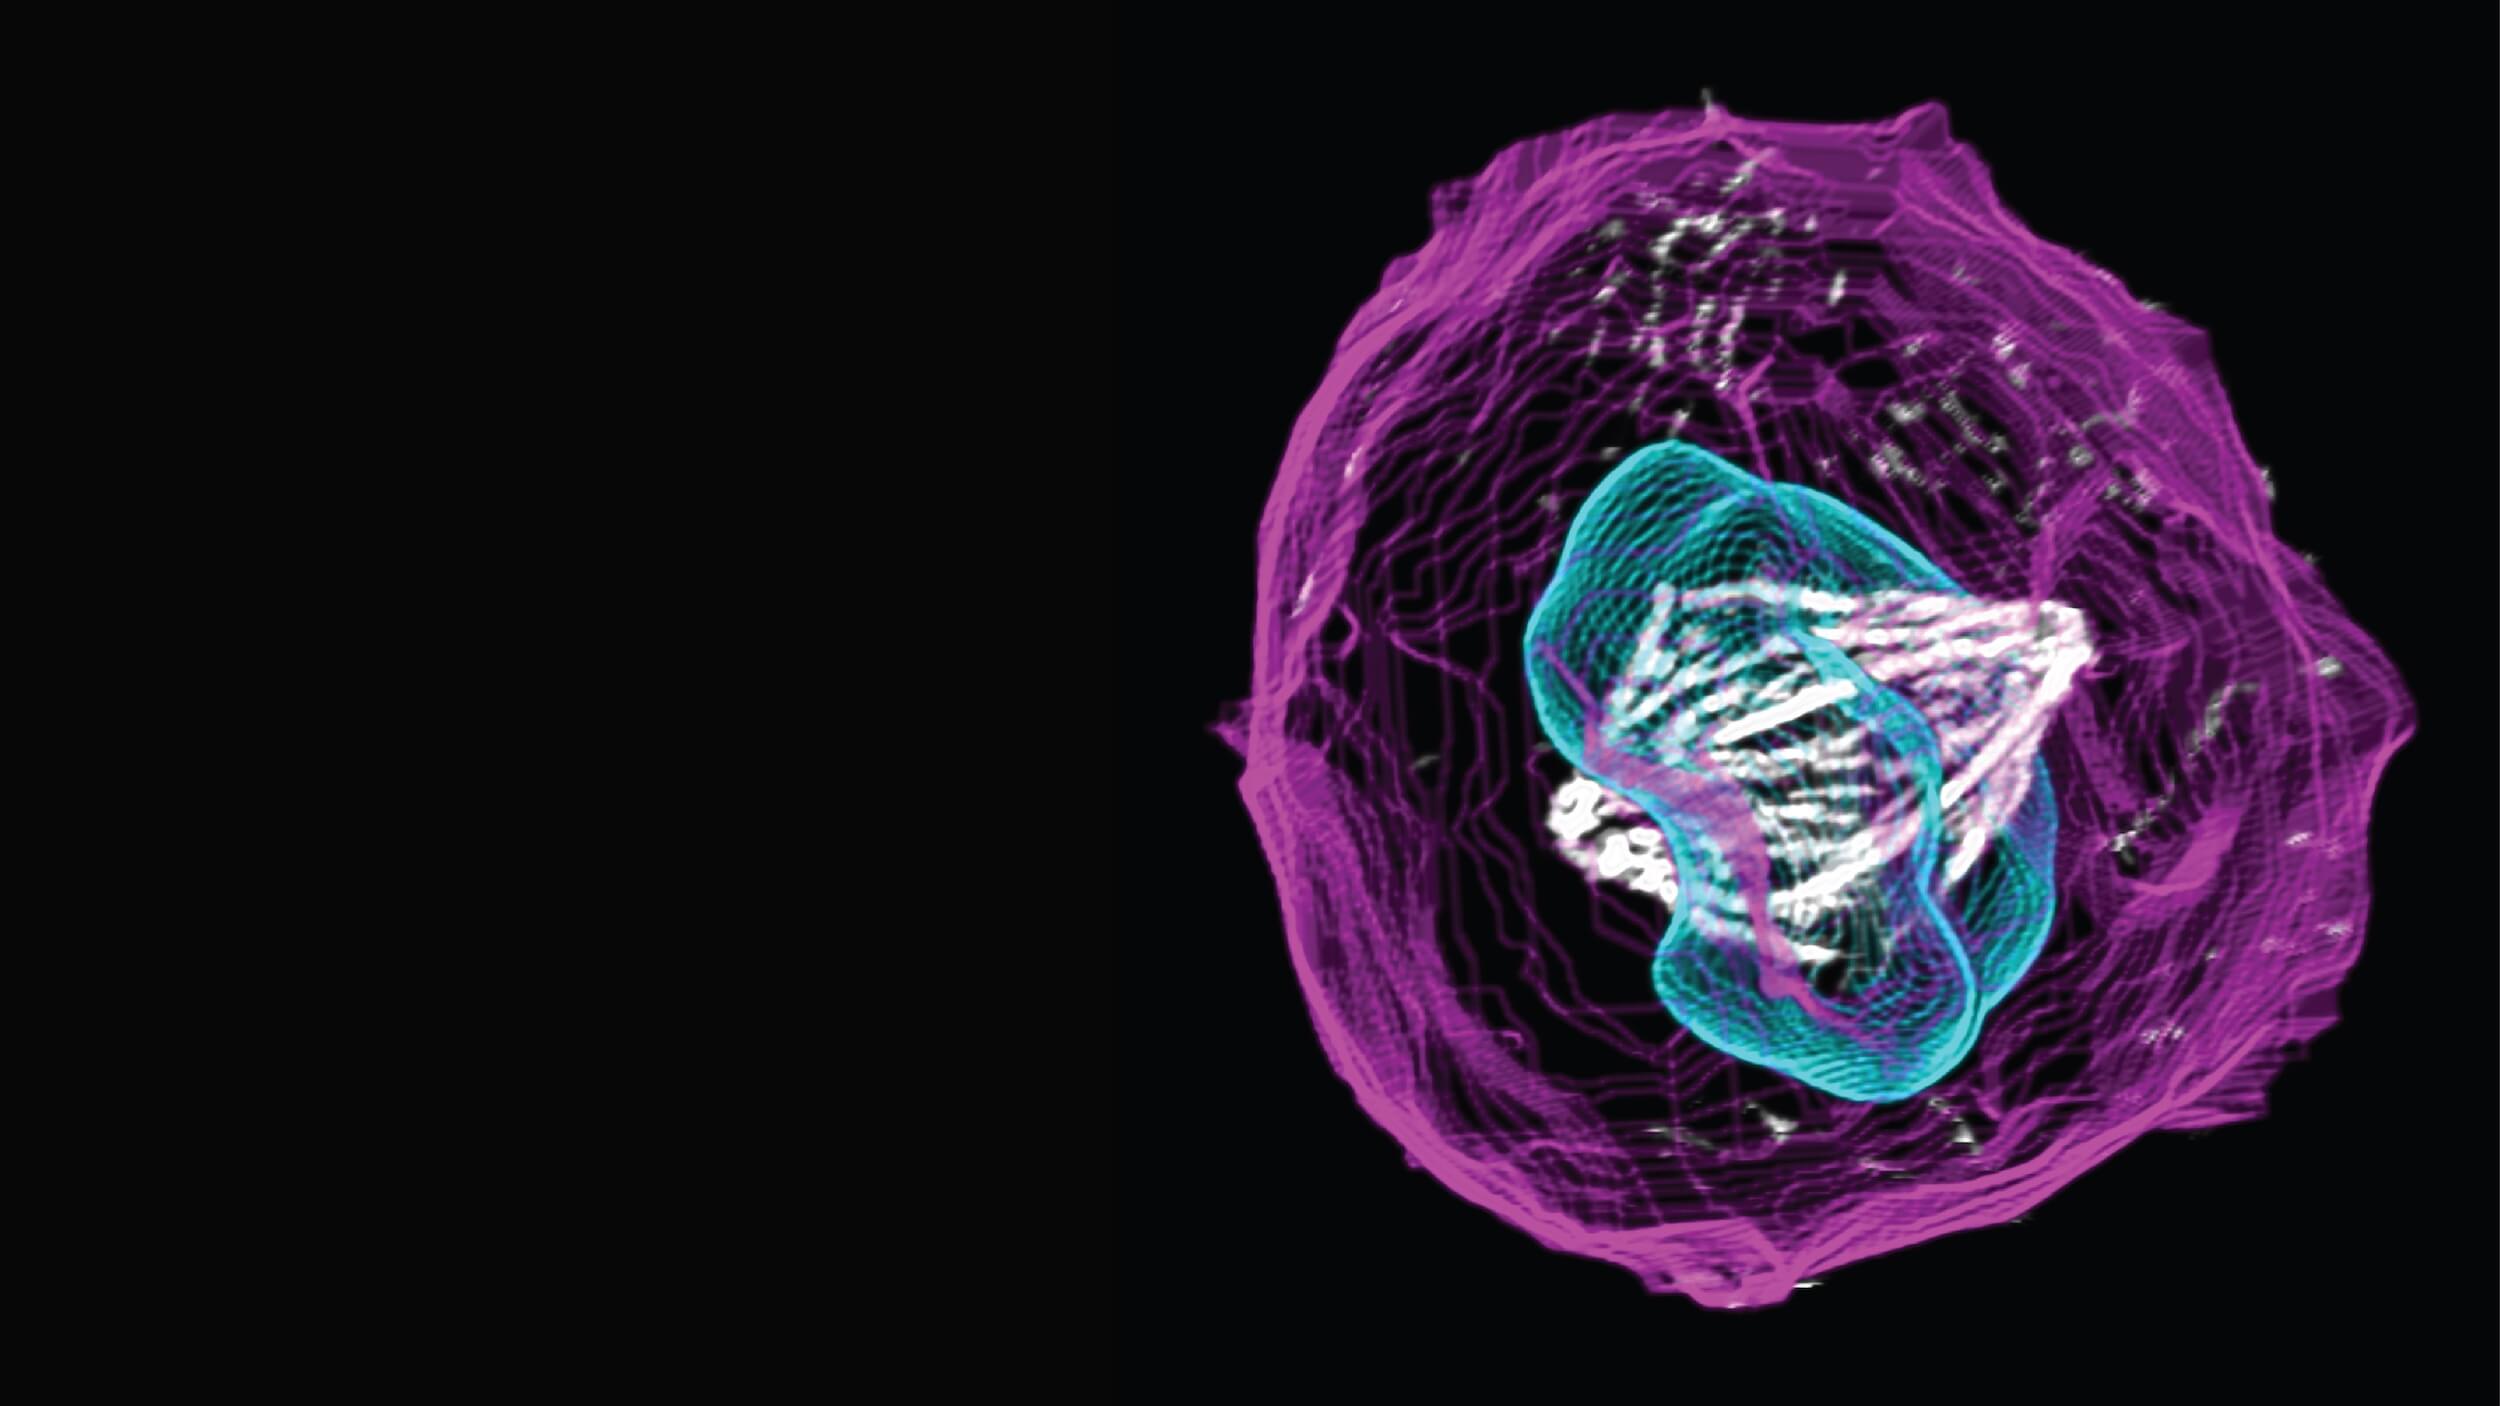 Image of one human cell with a mitotic spindle